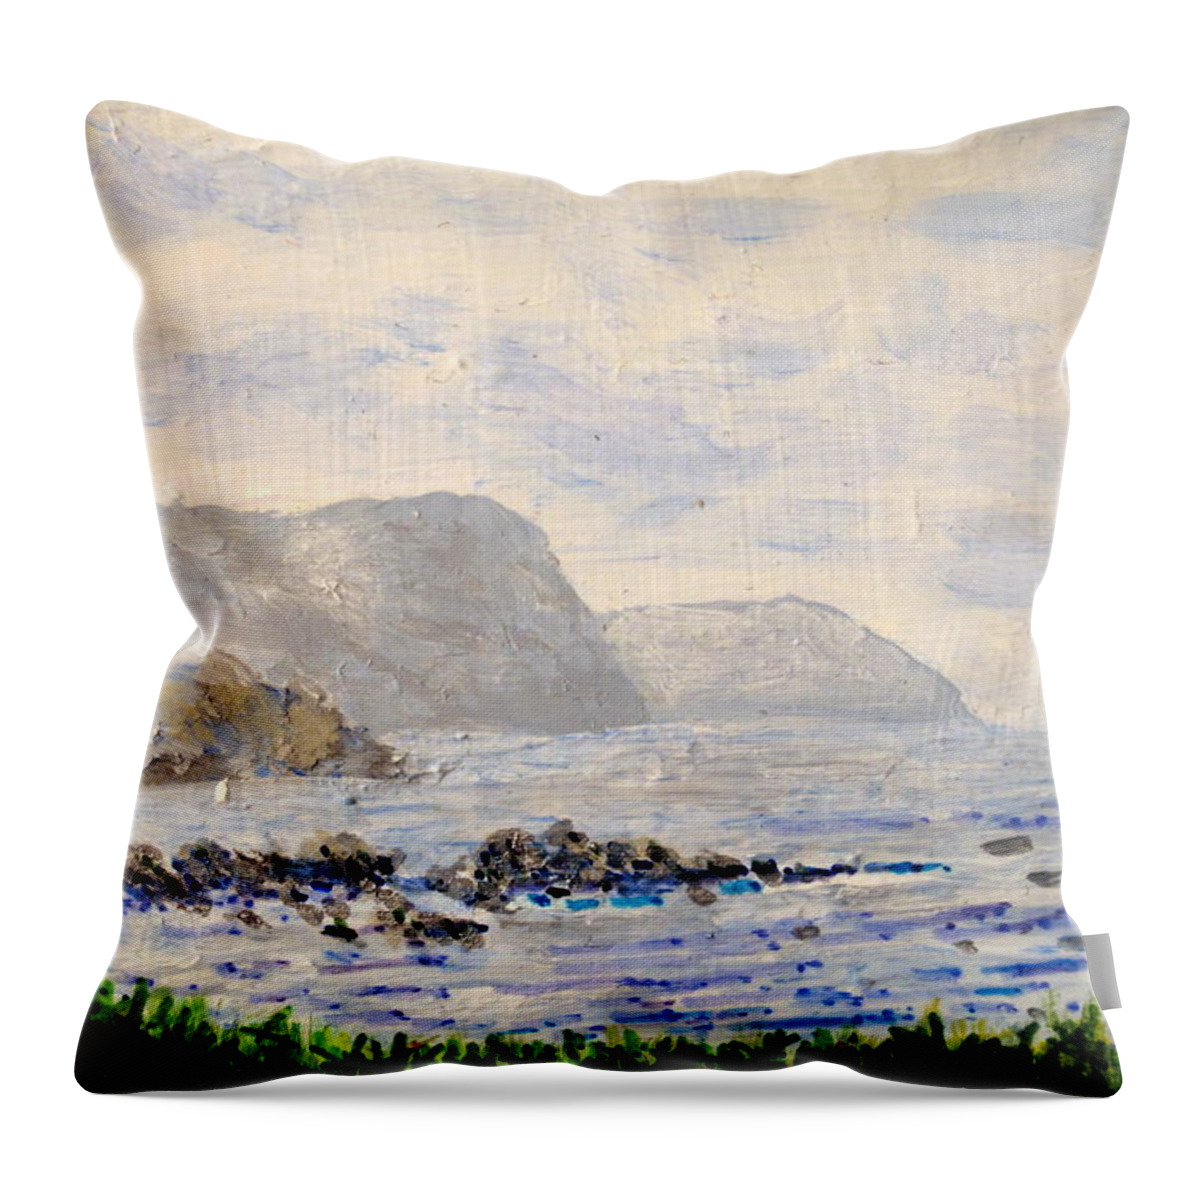 Newfoundland Throw Pillow featuring the painting Newfoundland - South From Rocky Harbour by Ian MacDonald